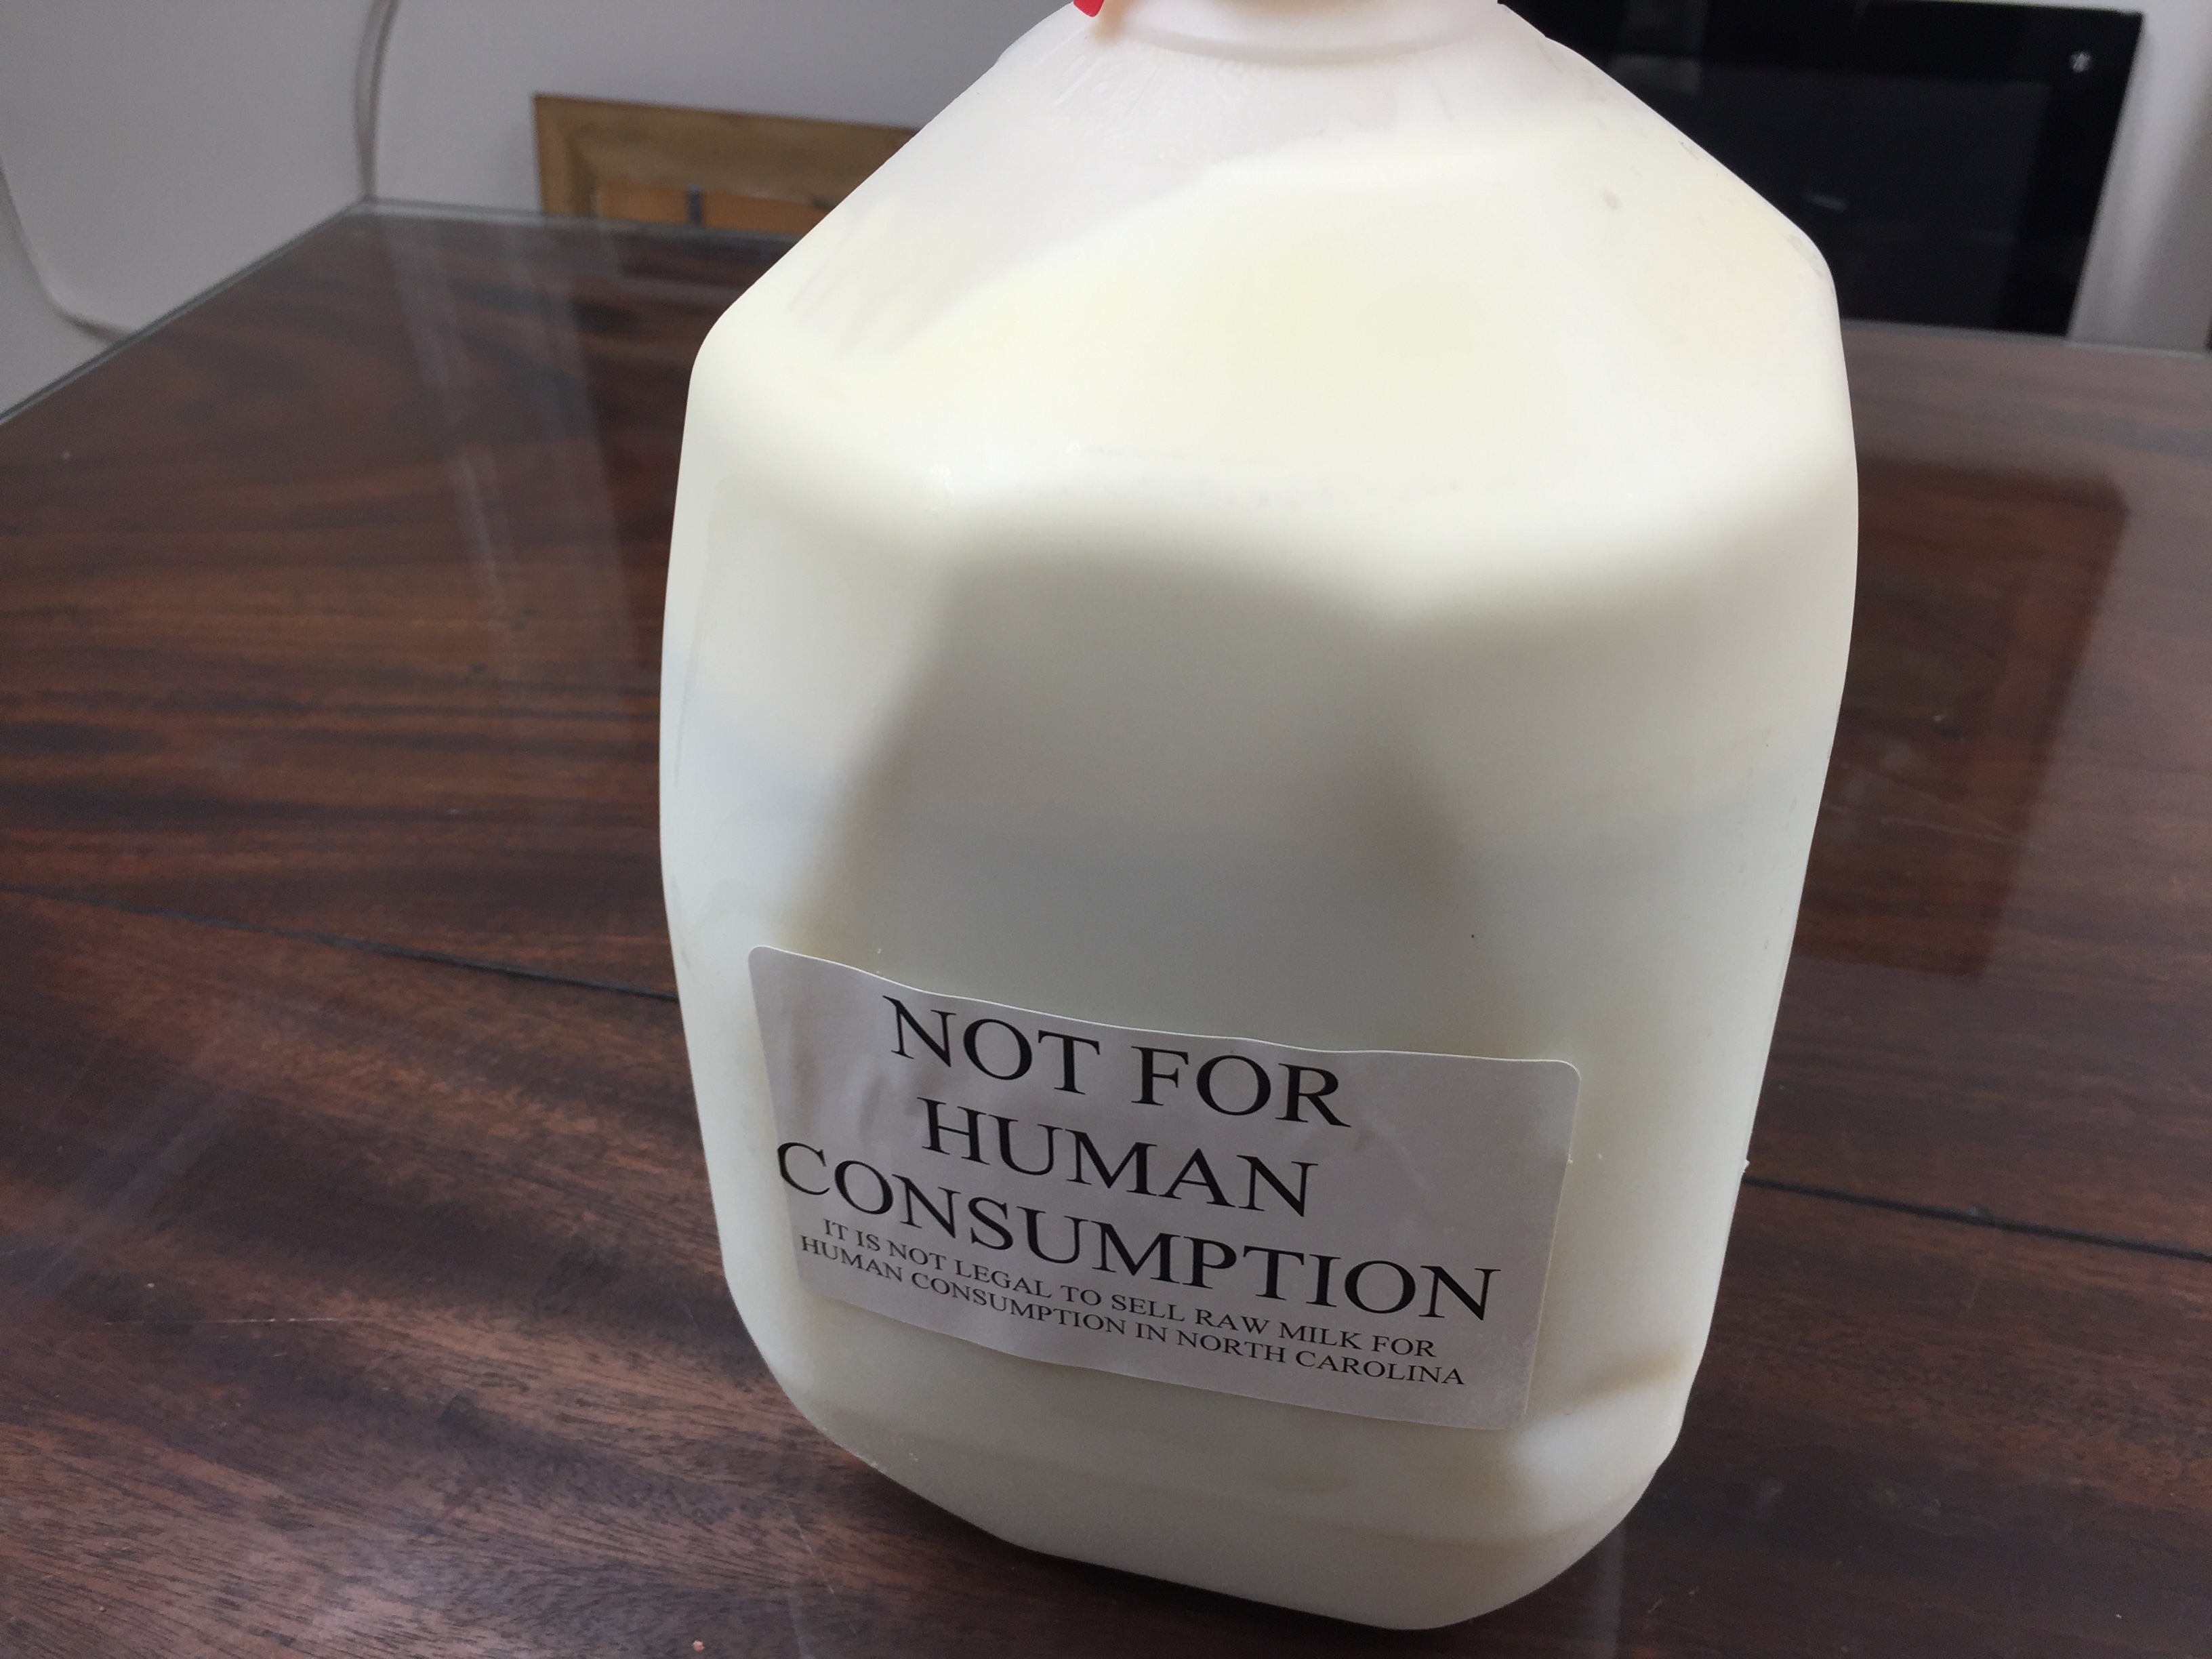 Raw milk, with NC required warnings